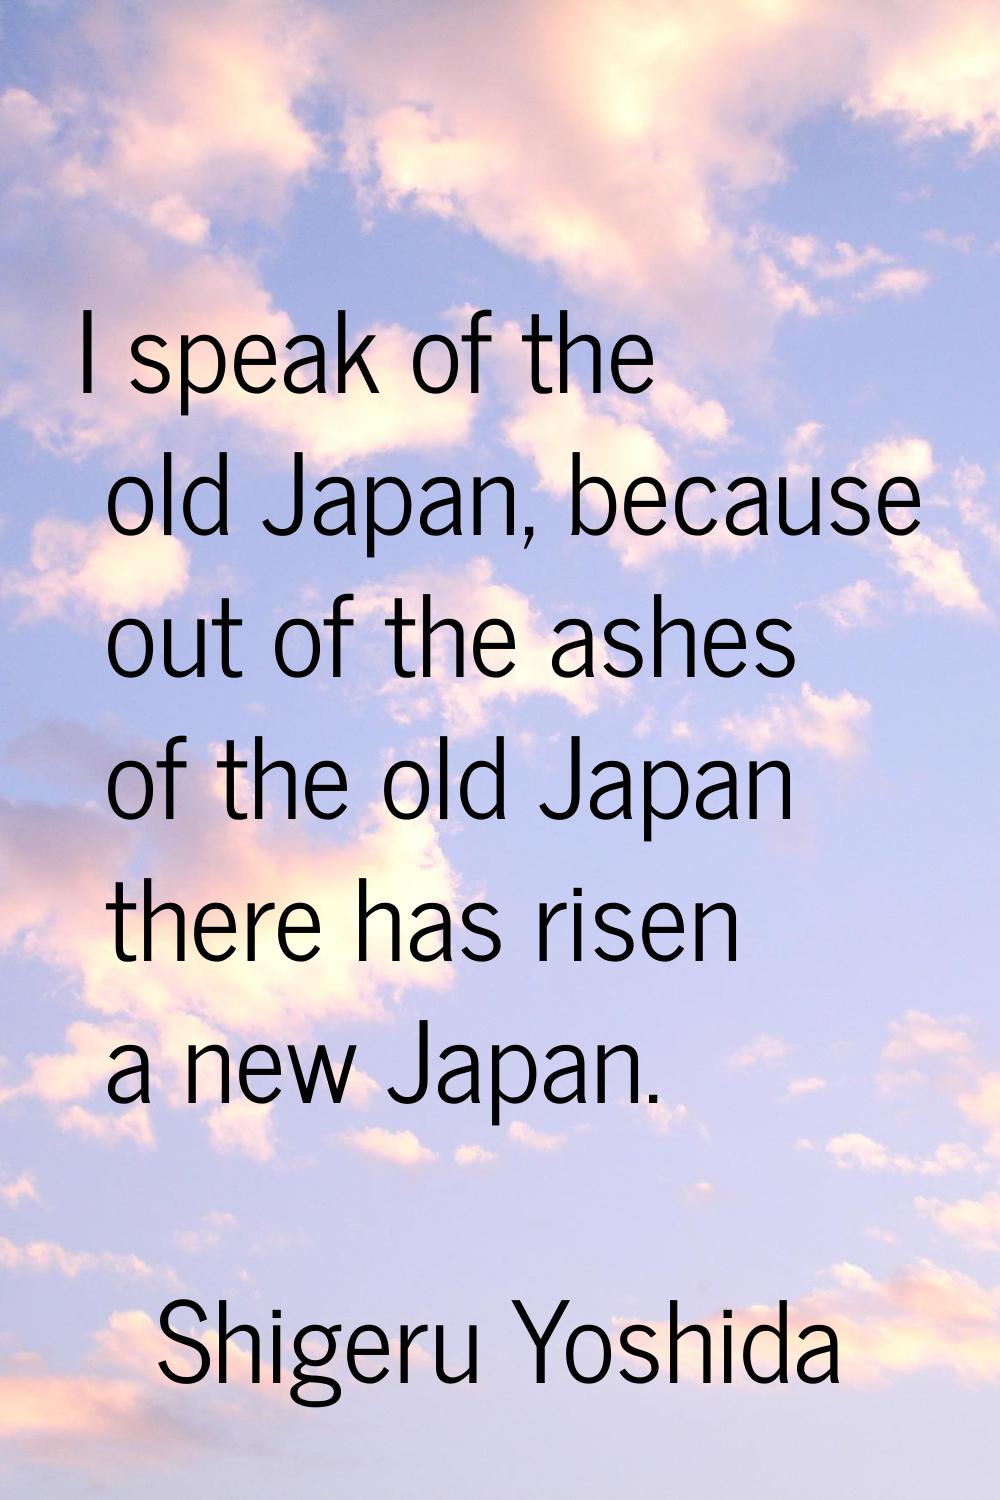 I speak of the old Japan, because out of the ashes of the old Japan there has risen a new Japan.